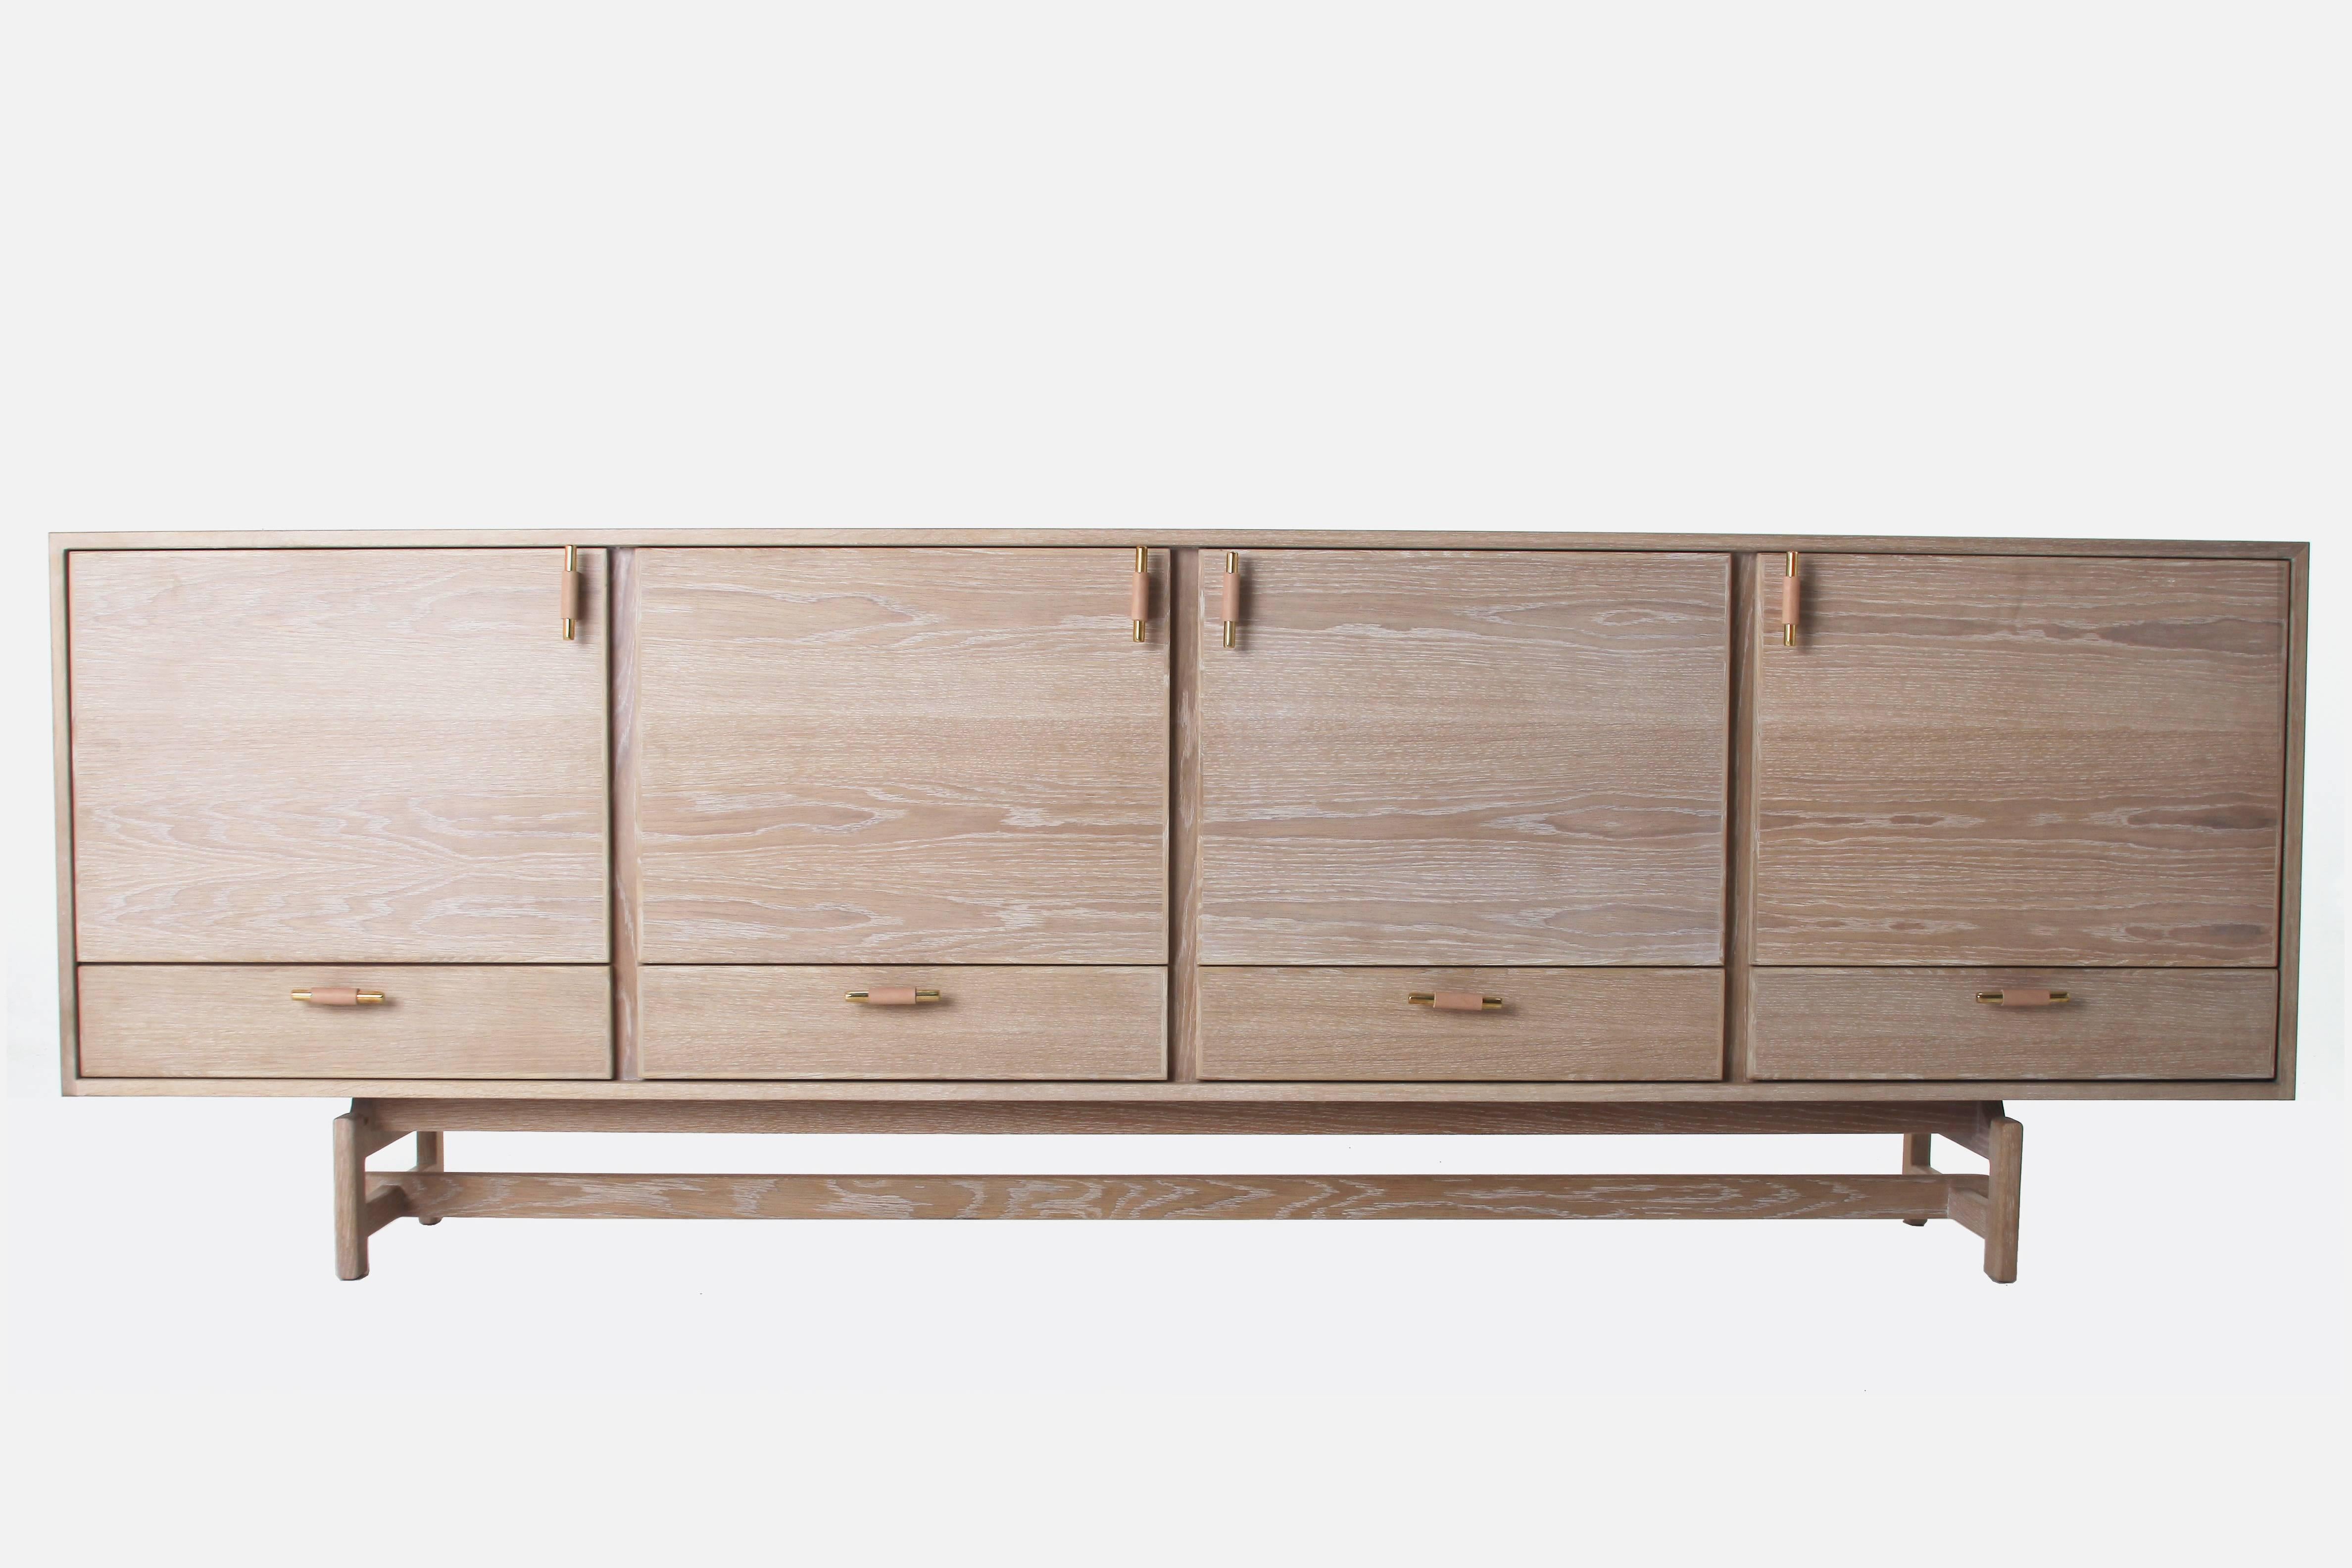 The Josephine Credenza with a wood base comes in walnut or oak with a variety of finish options. Pulls are steel or brass wrapped in leather. Various combinations of the slatted media cabinet doors, regular doors, and drawers are available. 

Please